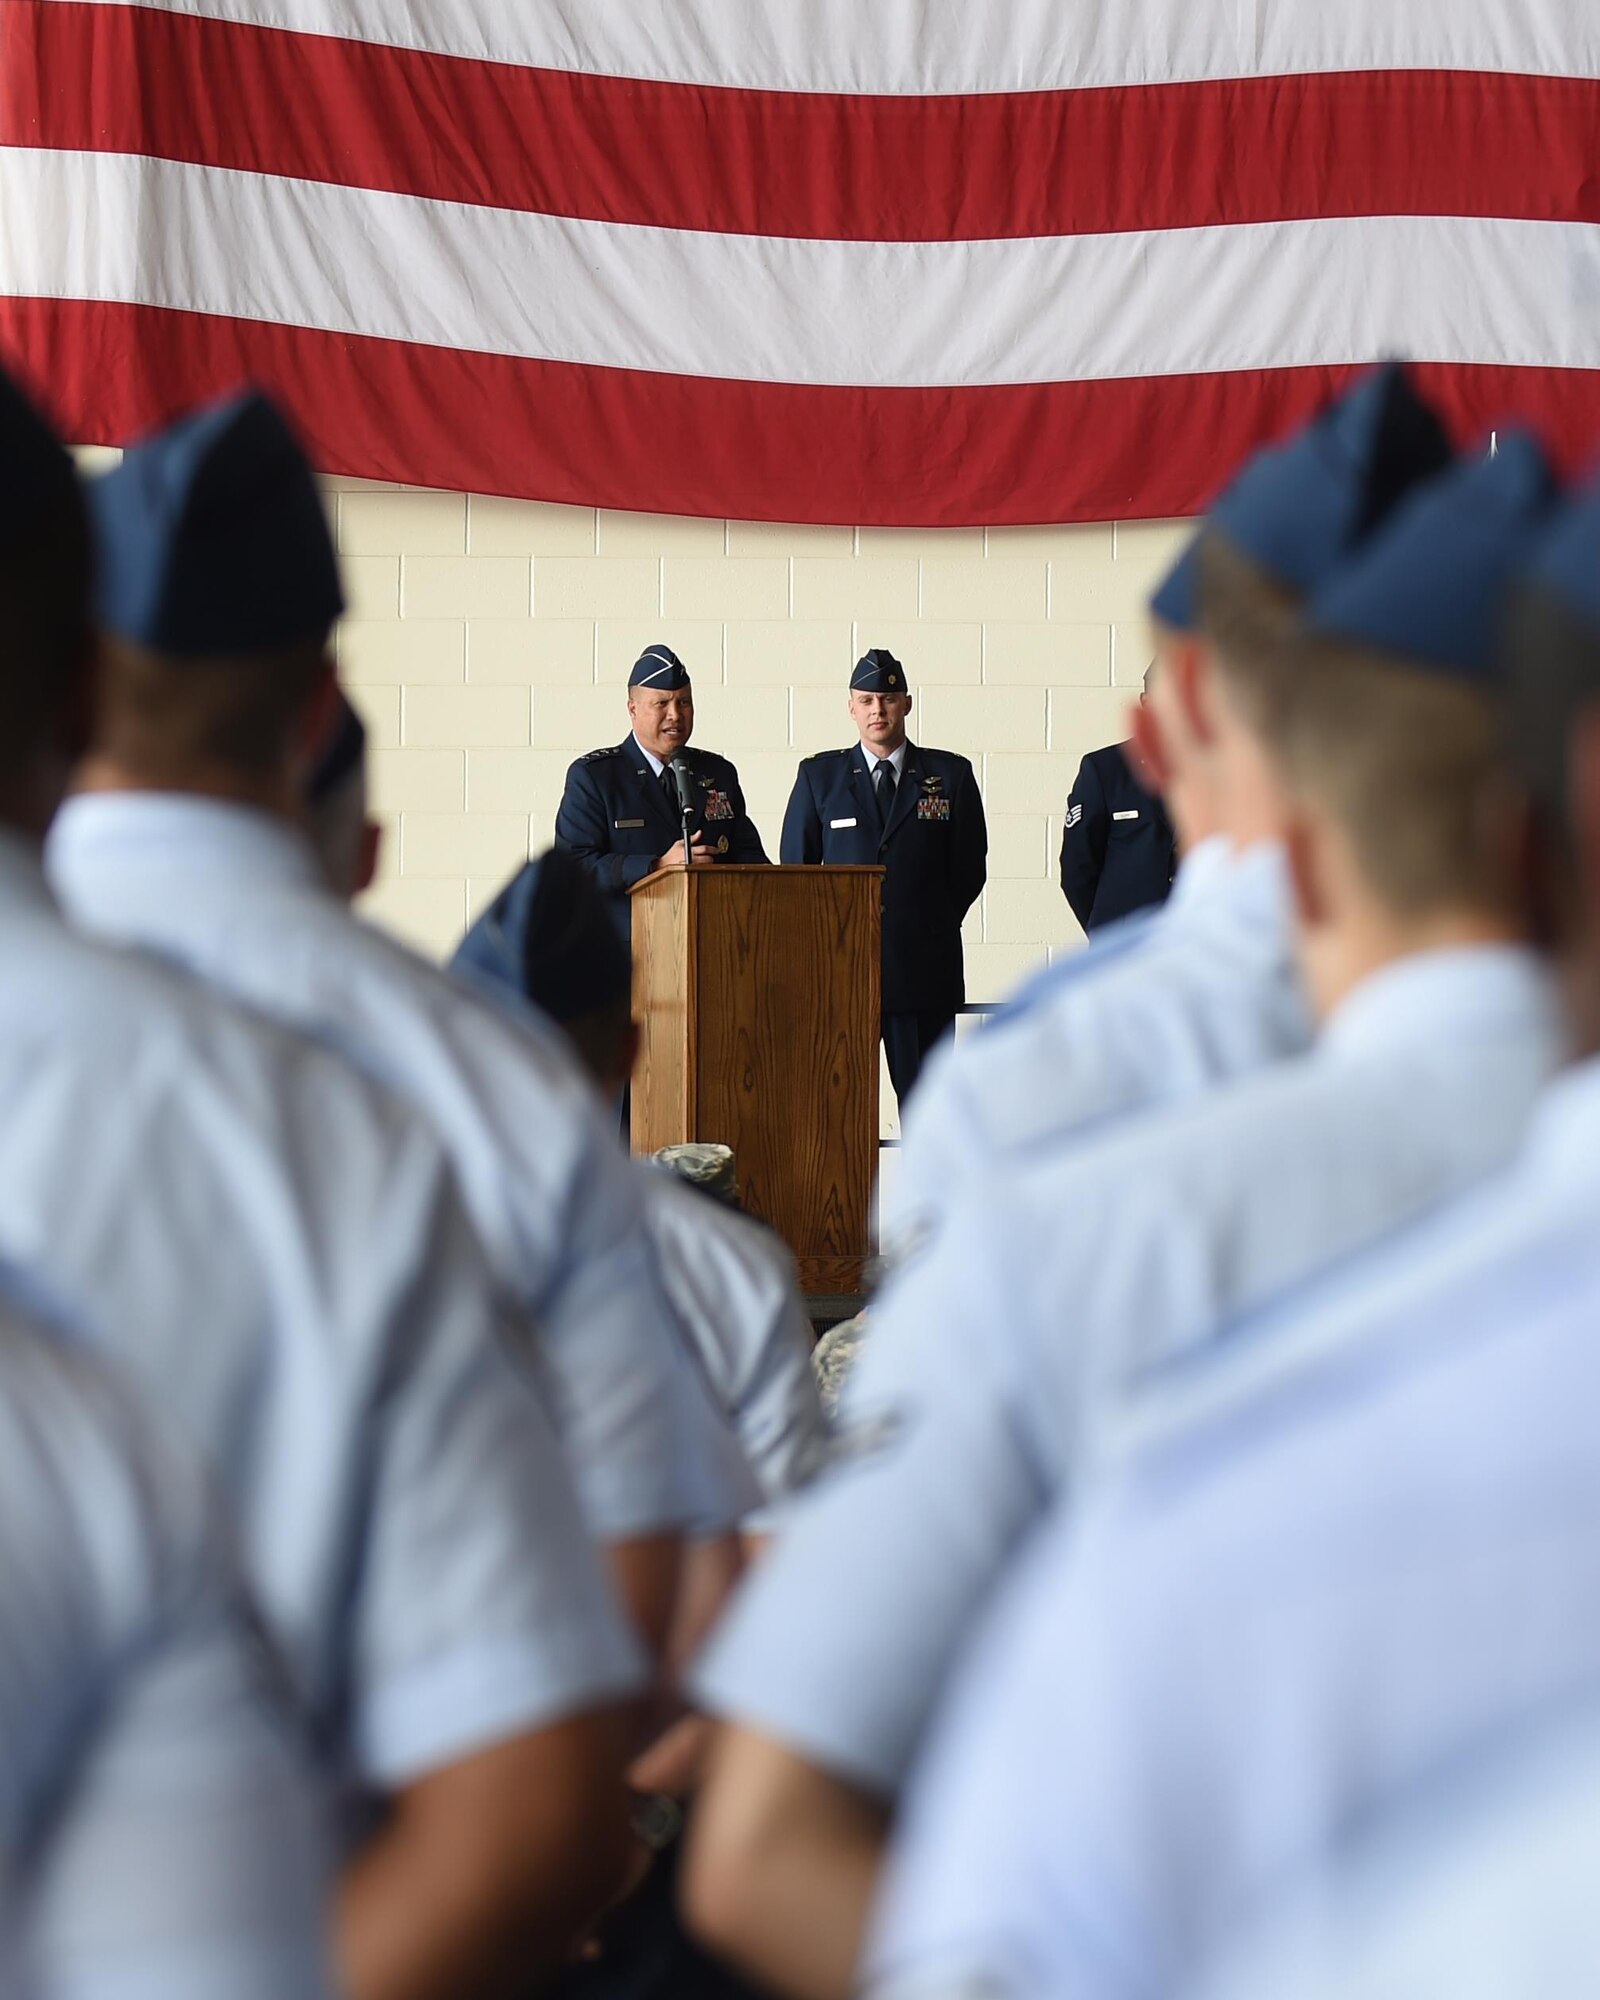 U.S. Air Force Maj. Gen. Giovanni Tuck, 18th Air Force commander, addresses the attendees at the 317th Airlift Wing activation ceremony at Dyess Air Force Base, Texas, July 6, 2017. Tuck presided over the ceremony that deactivated the 317th Airlift Group and reactivated it as the 317th Airlift Wing. The 317th Operation Support Group and 317th Maintenance Group were also activated as part of the wing. (U.S. Air Force photo by Senior Airman Alexander Guerrero)